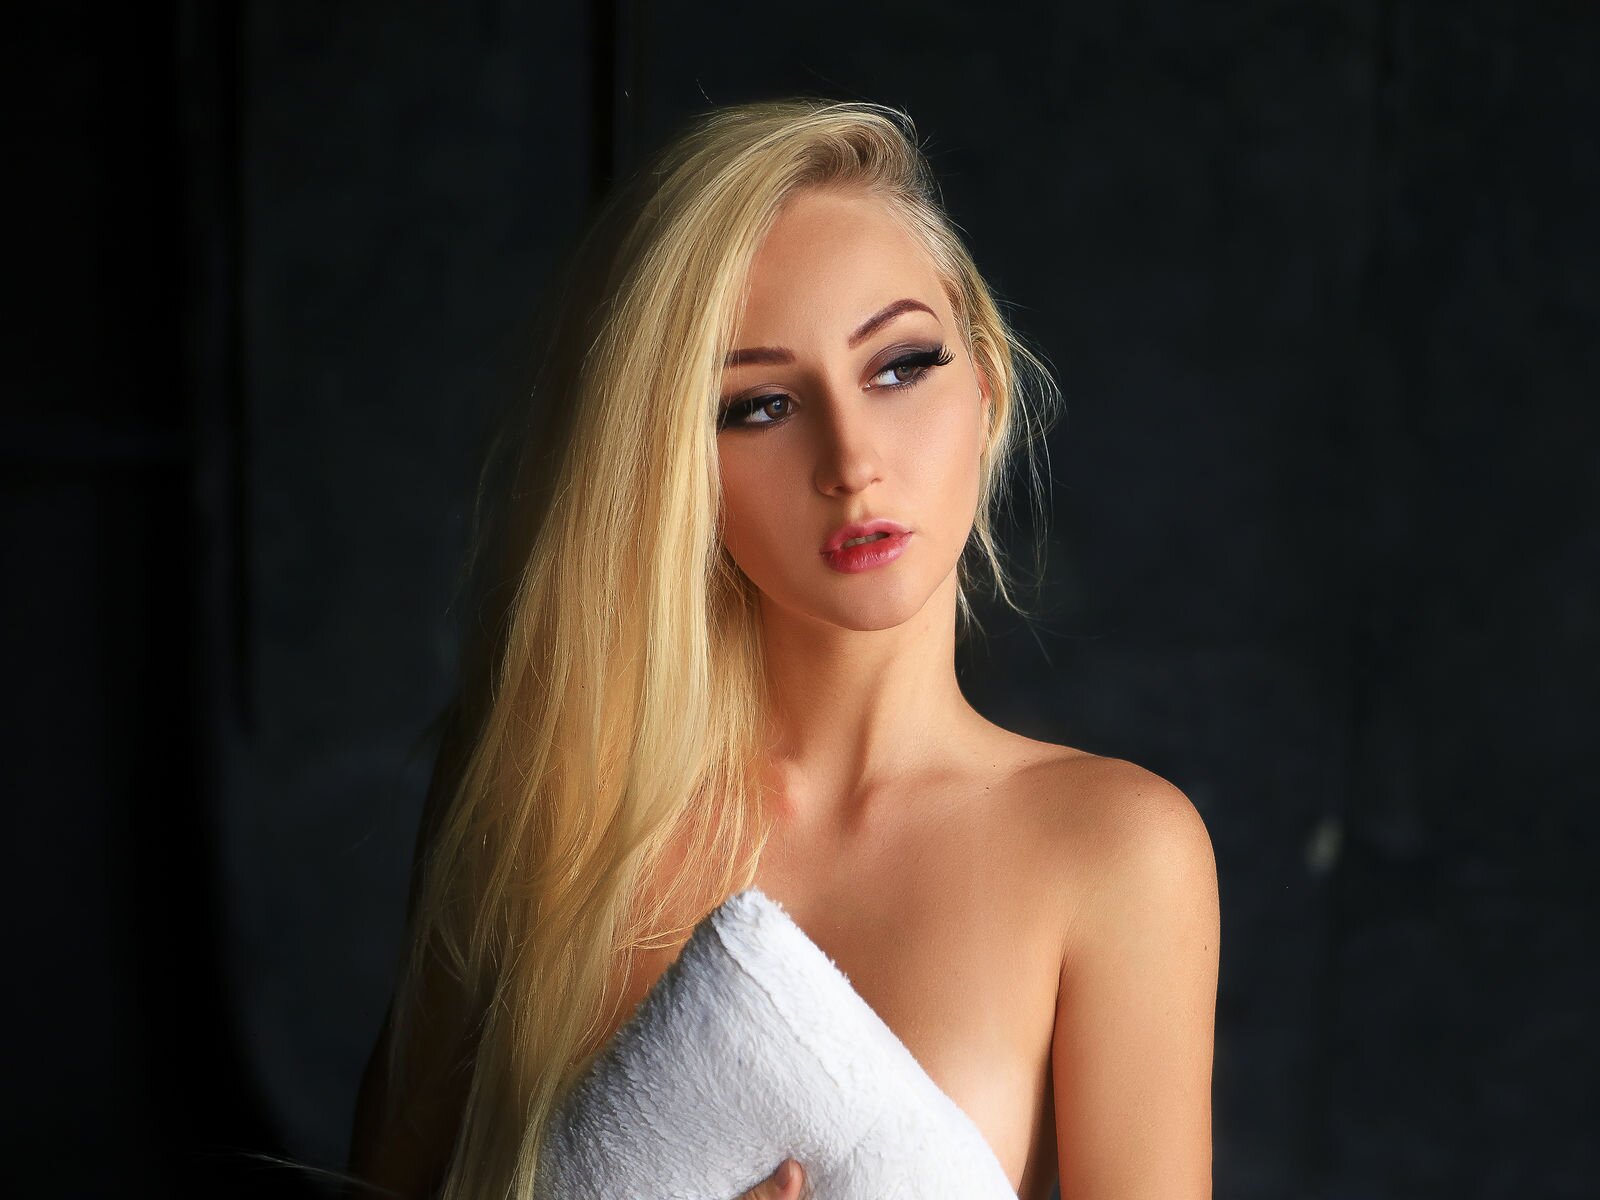 Free Live Sex Chat With LauraSh